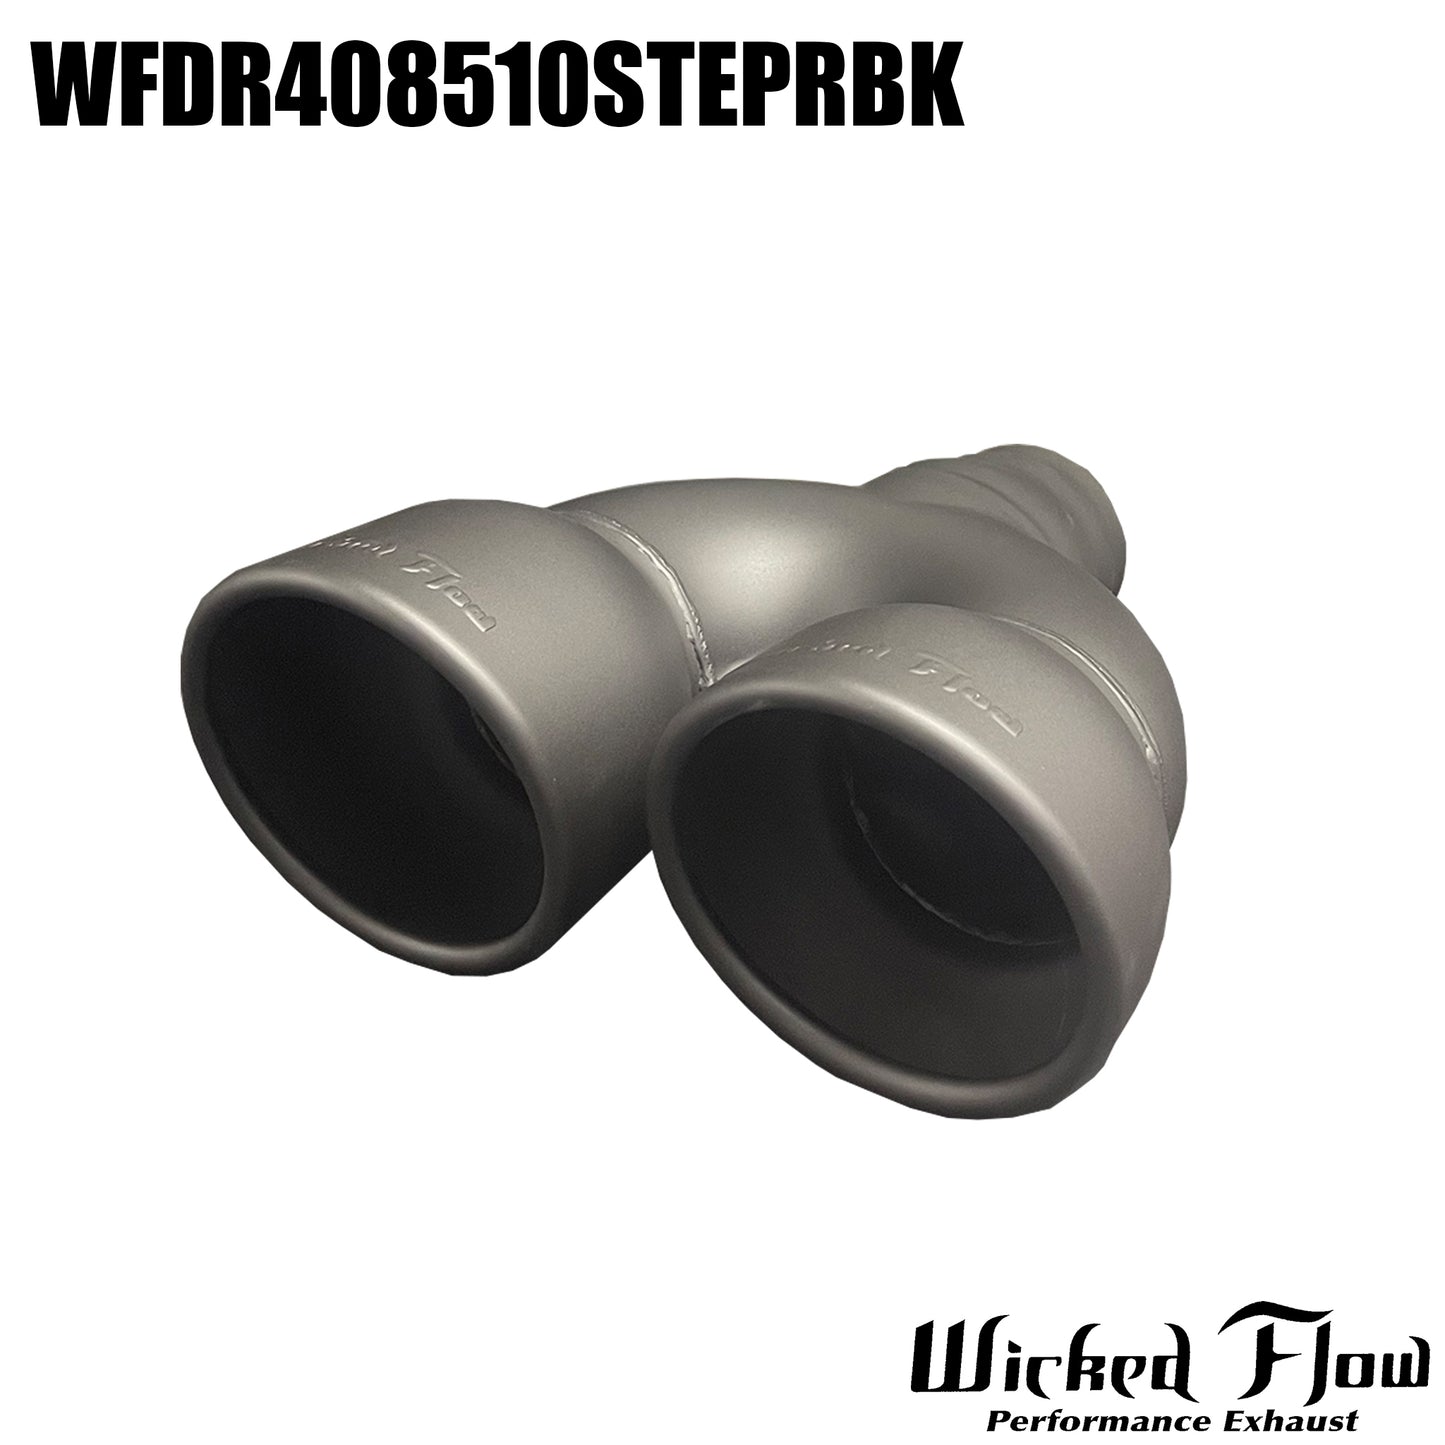 WFDR408510STEPRBK- DUAL EXHAUST TIP - Step Inlet - POWDERCOATED "Right"